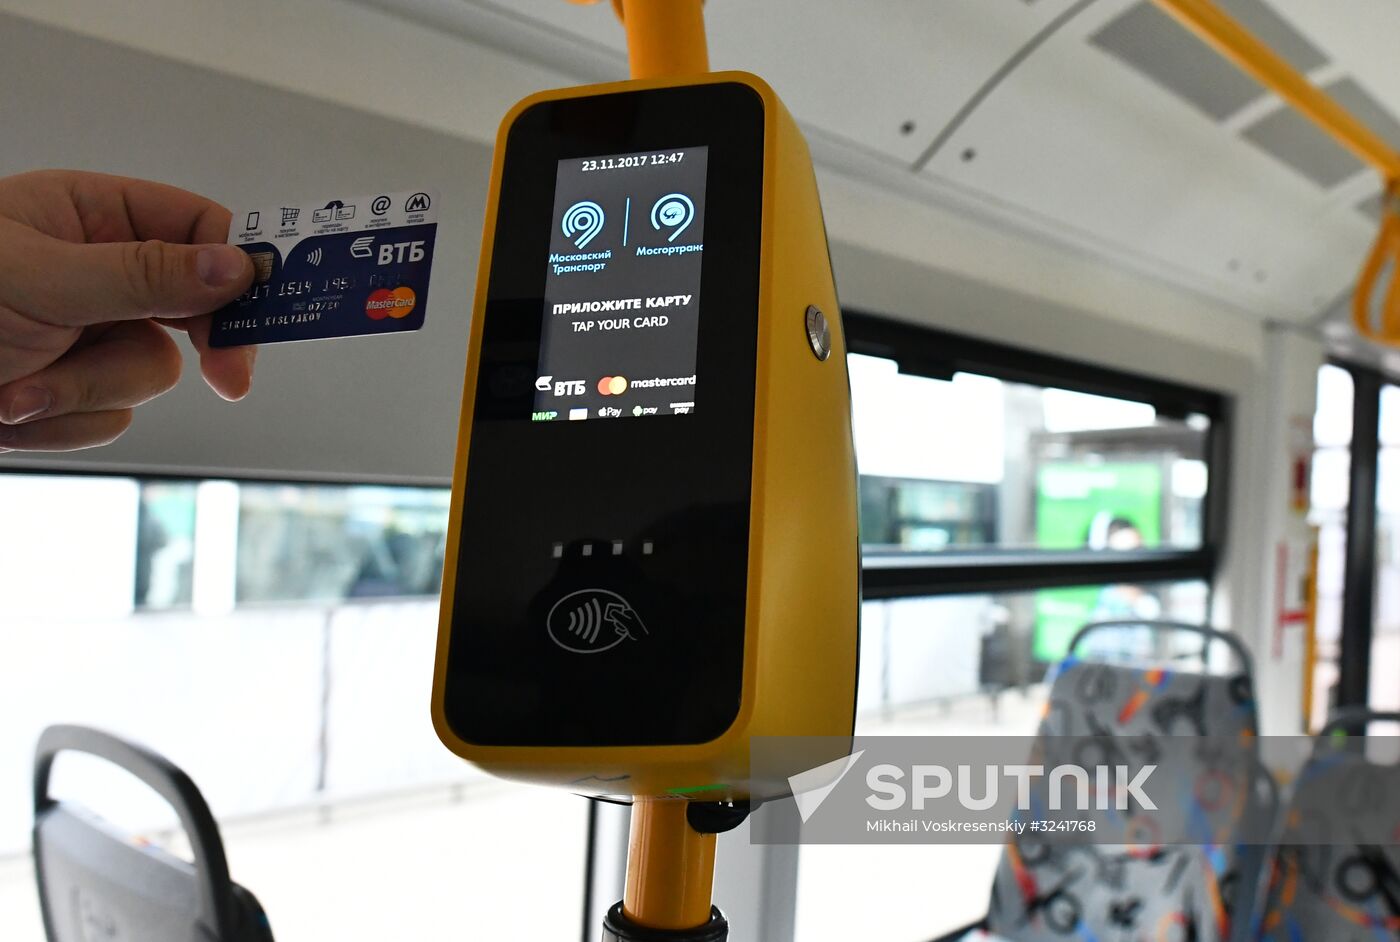 Contactless payment options for surface transport